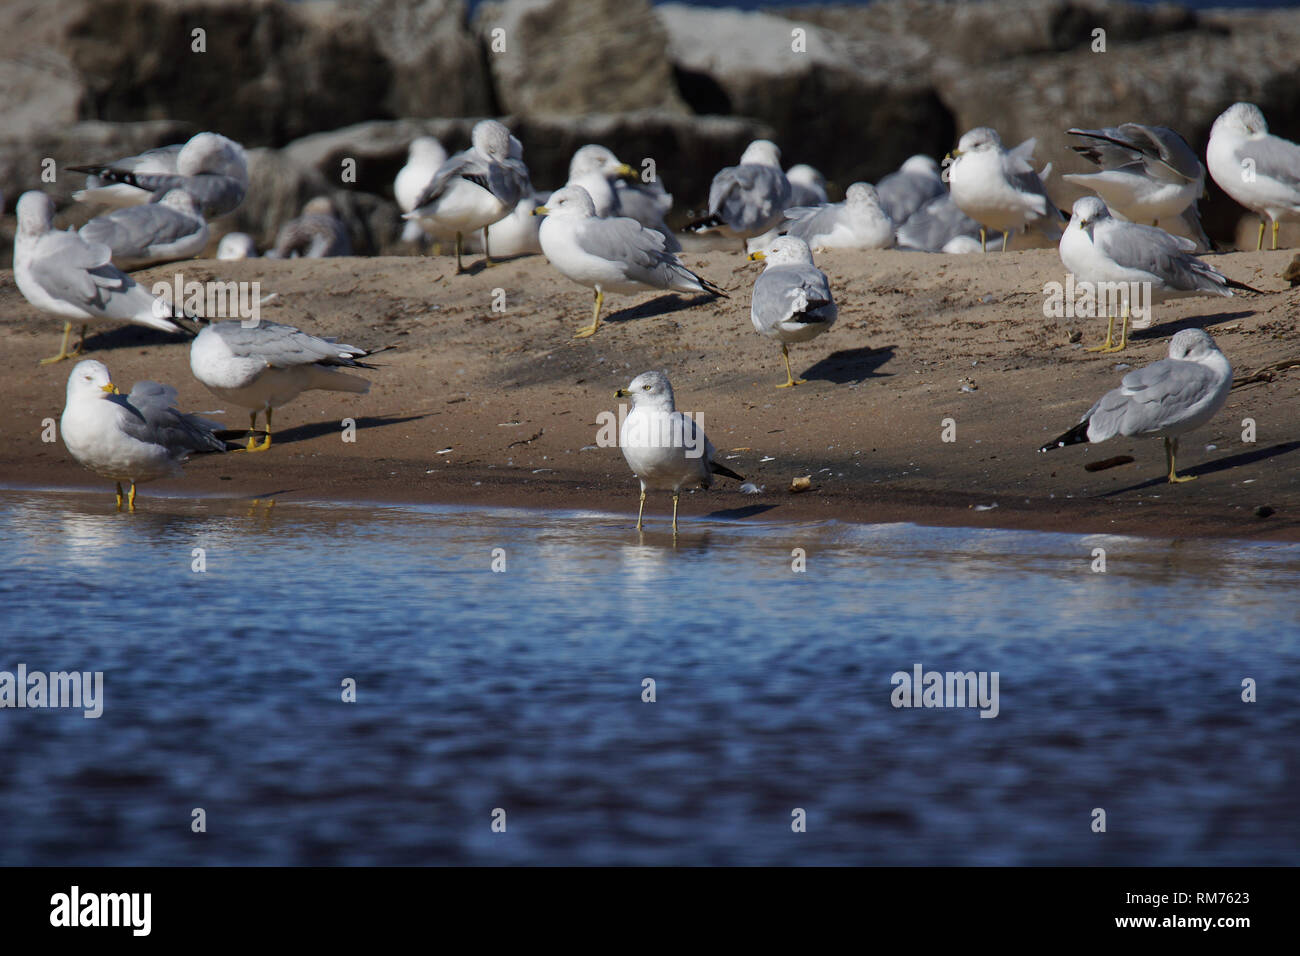 Group of Ring-billed Gull, Larus delawarensis, resting and preening on the beach Stock Photo